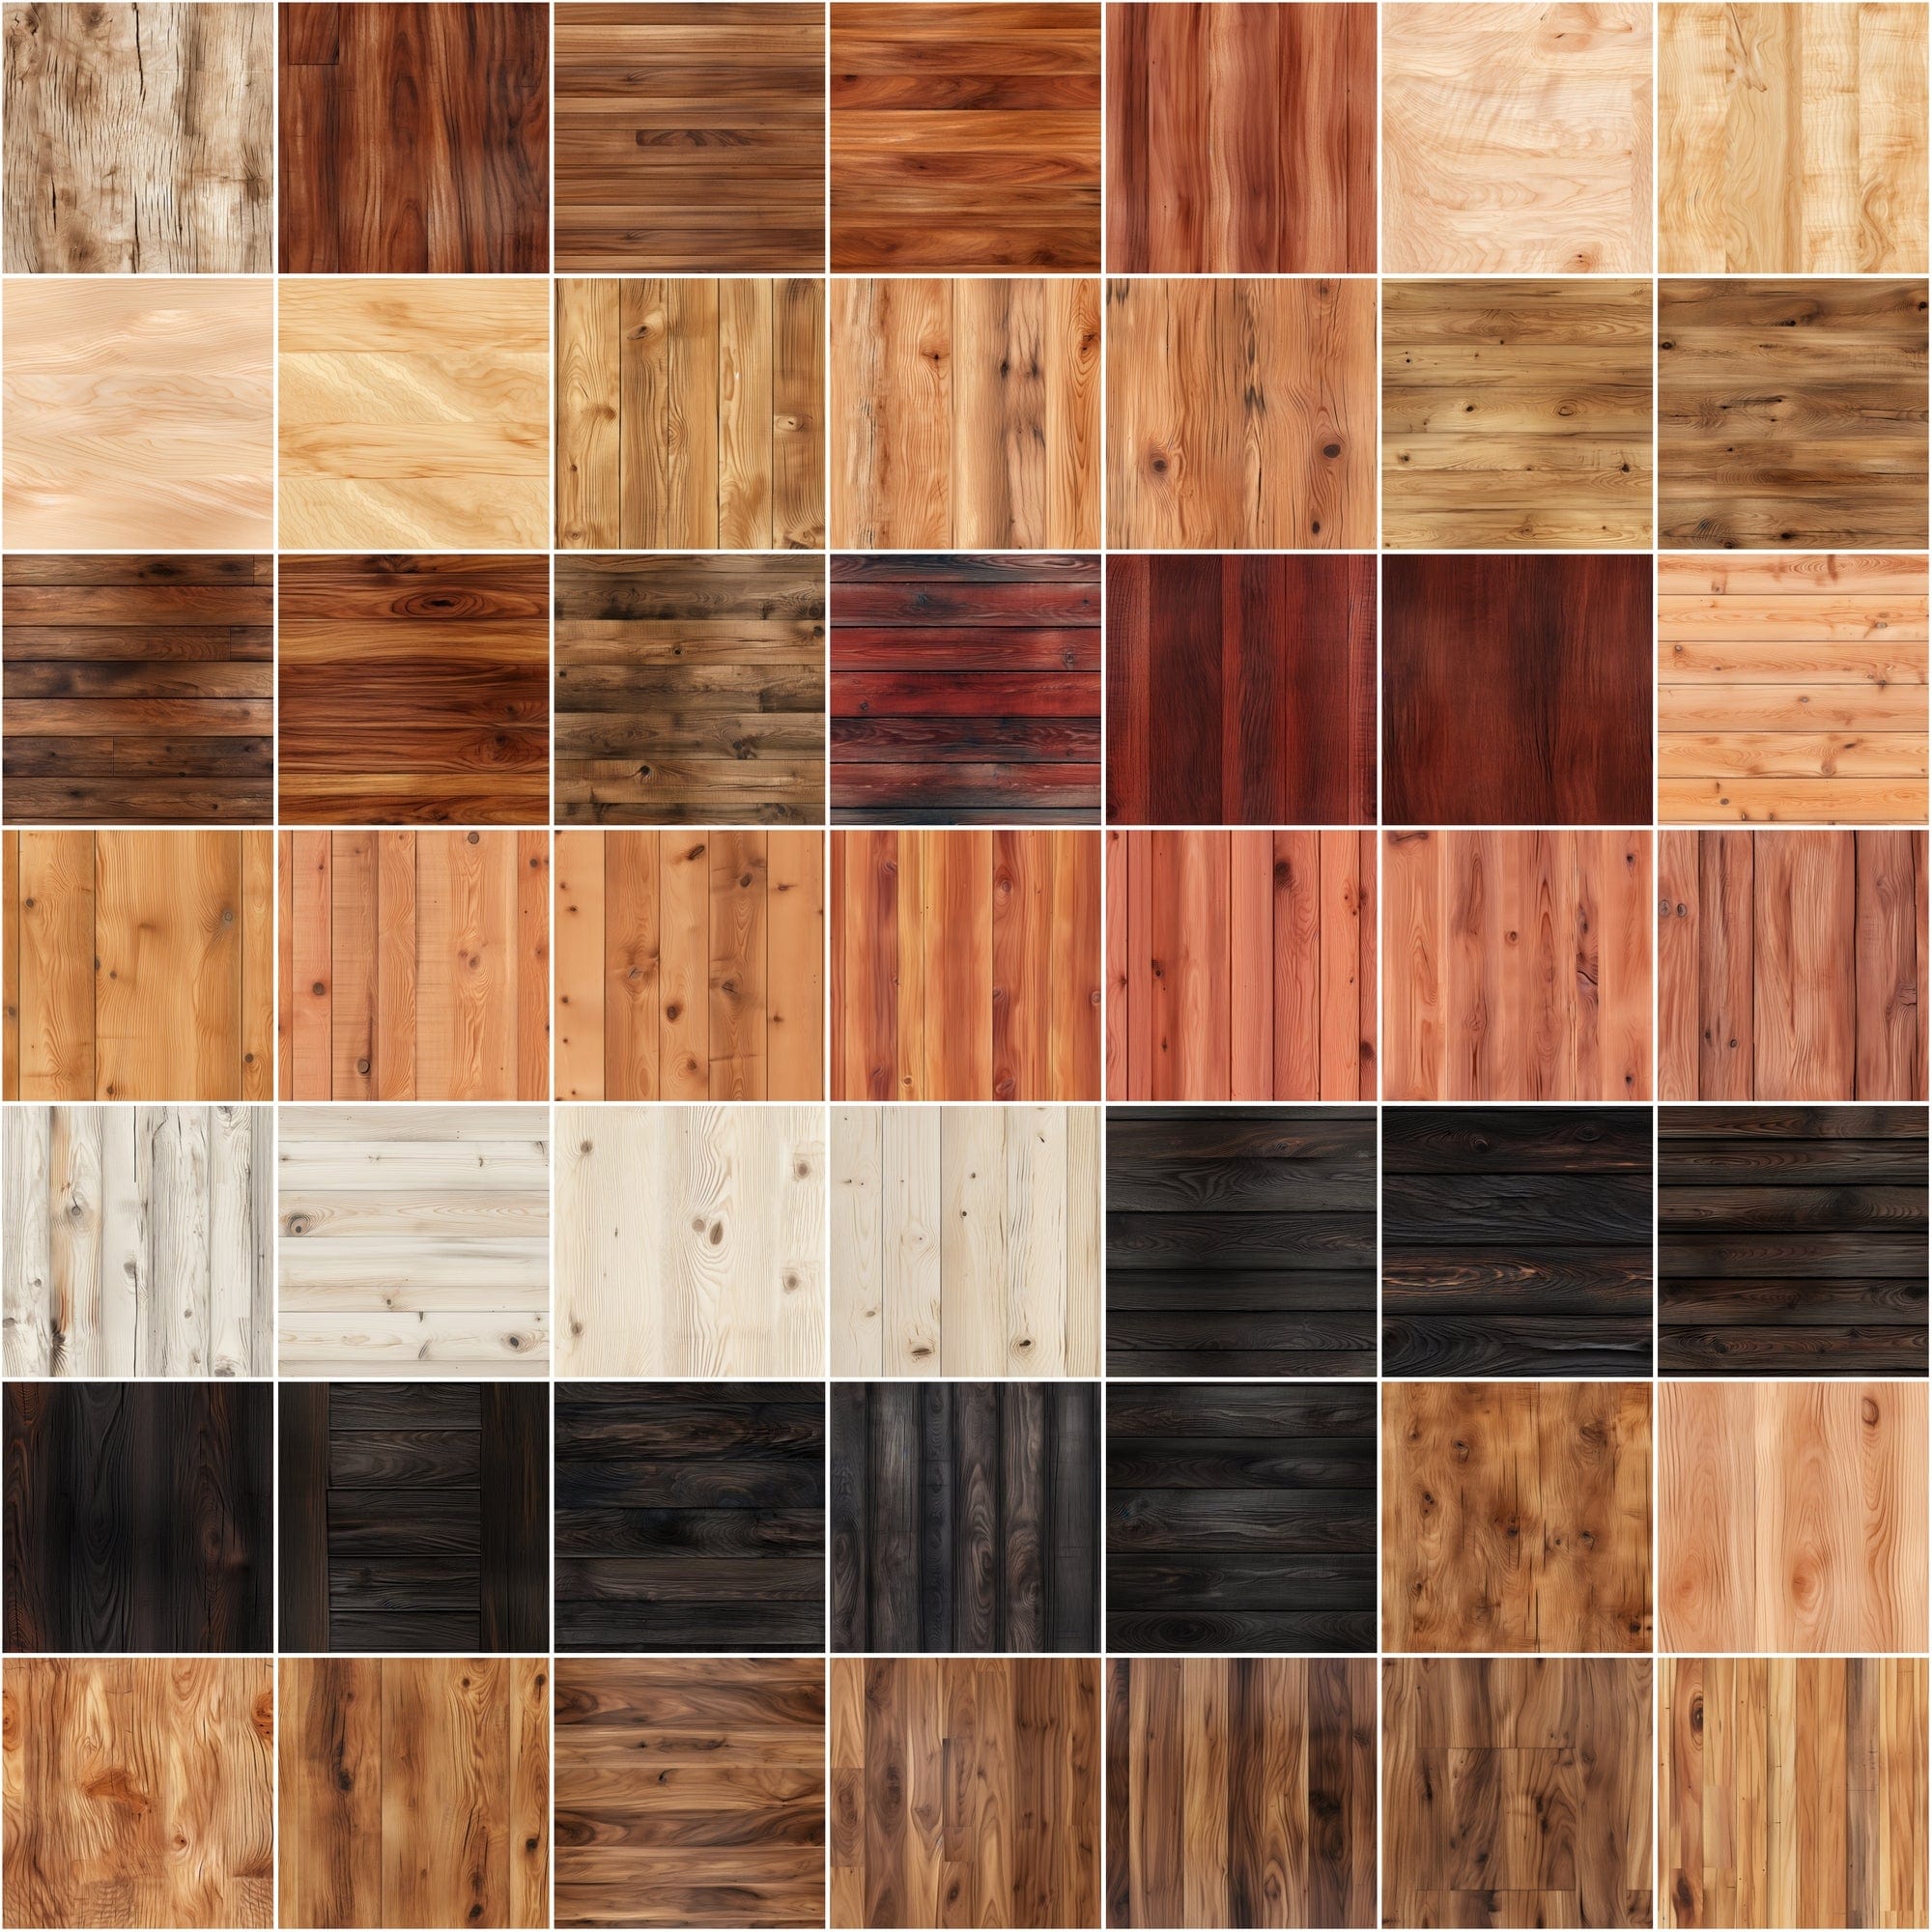 580 Seamless Wood Backgrounds & Photoshop Patterns Bundle - High-Resolution Images and .pat Files with Commercial License Sumobundle